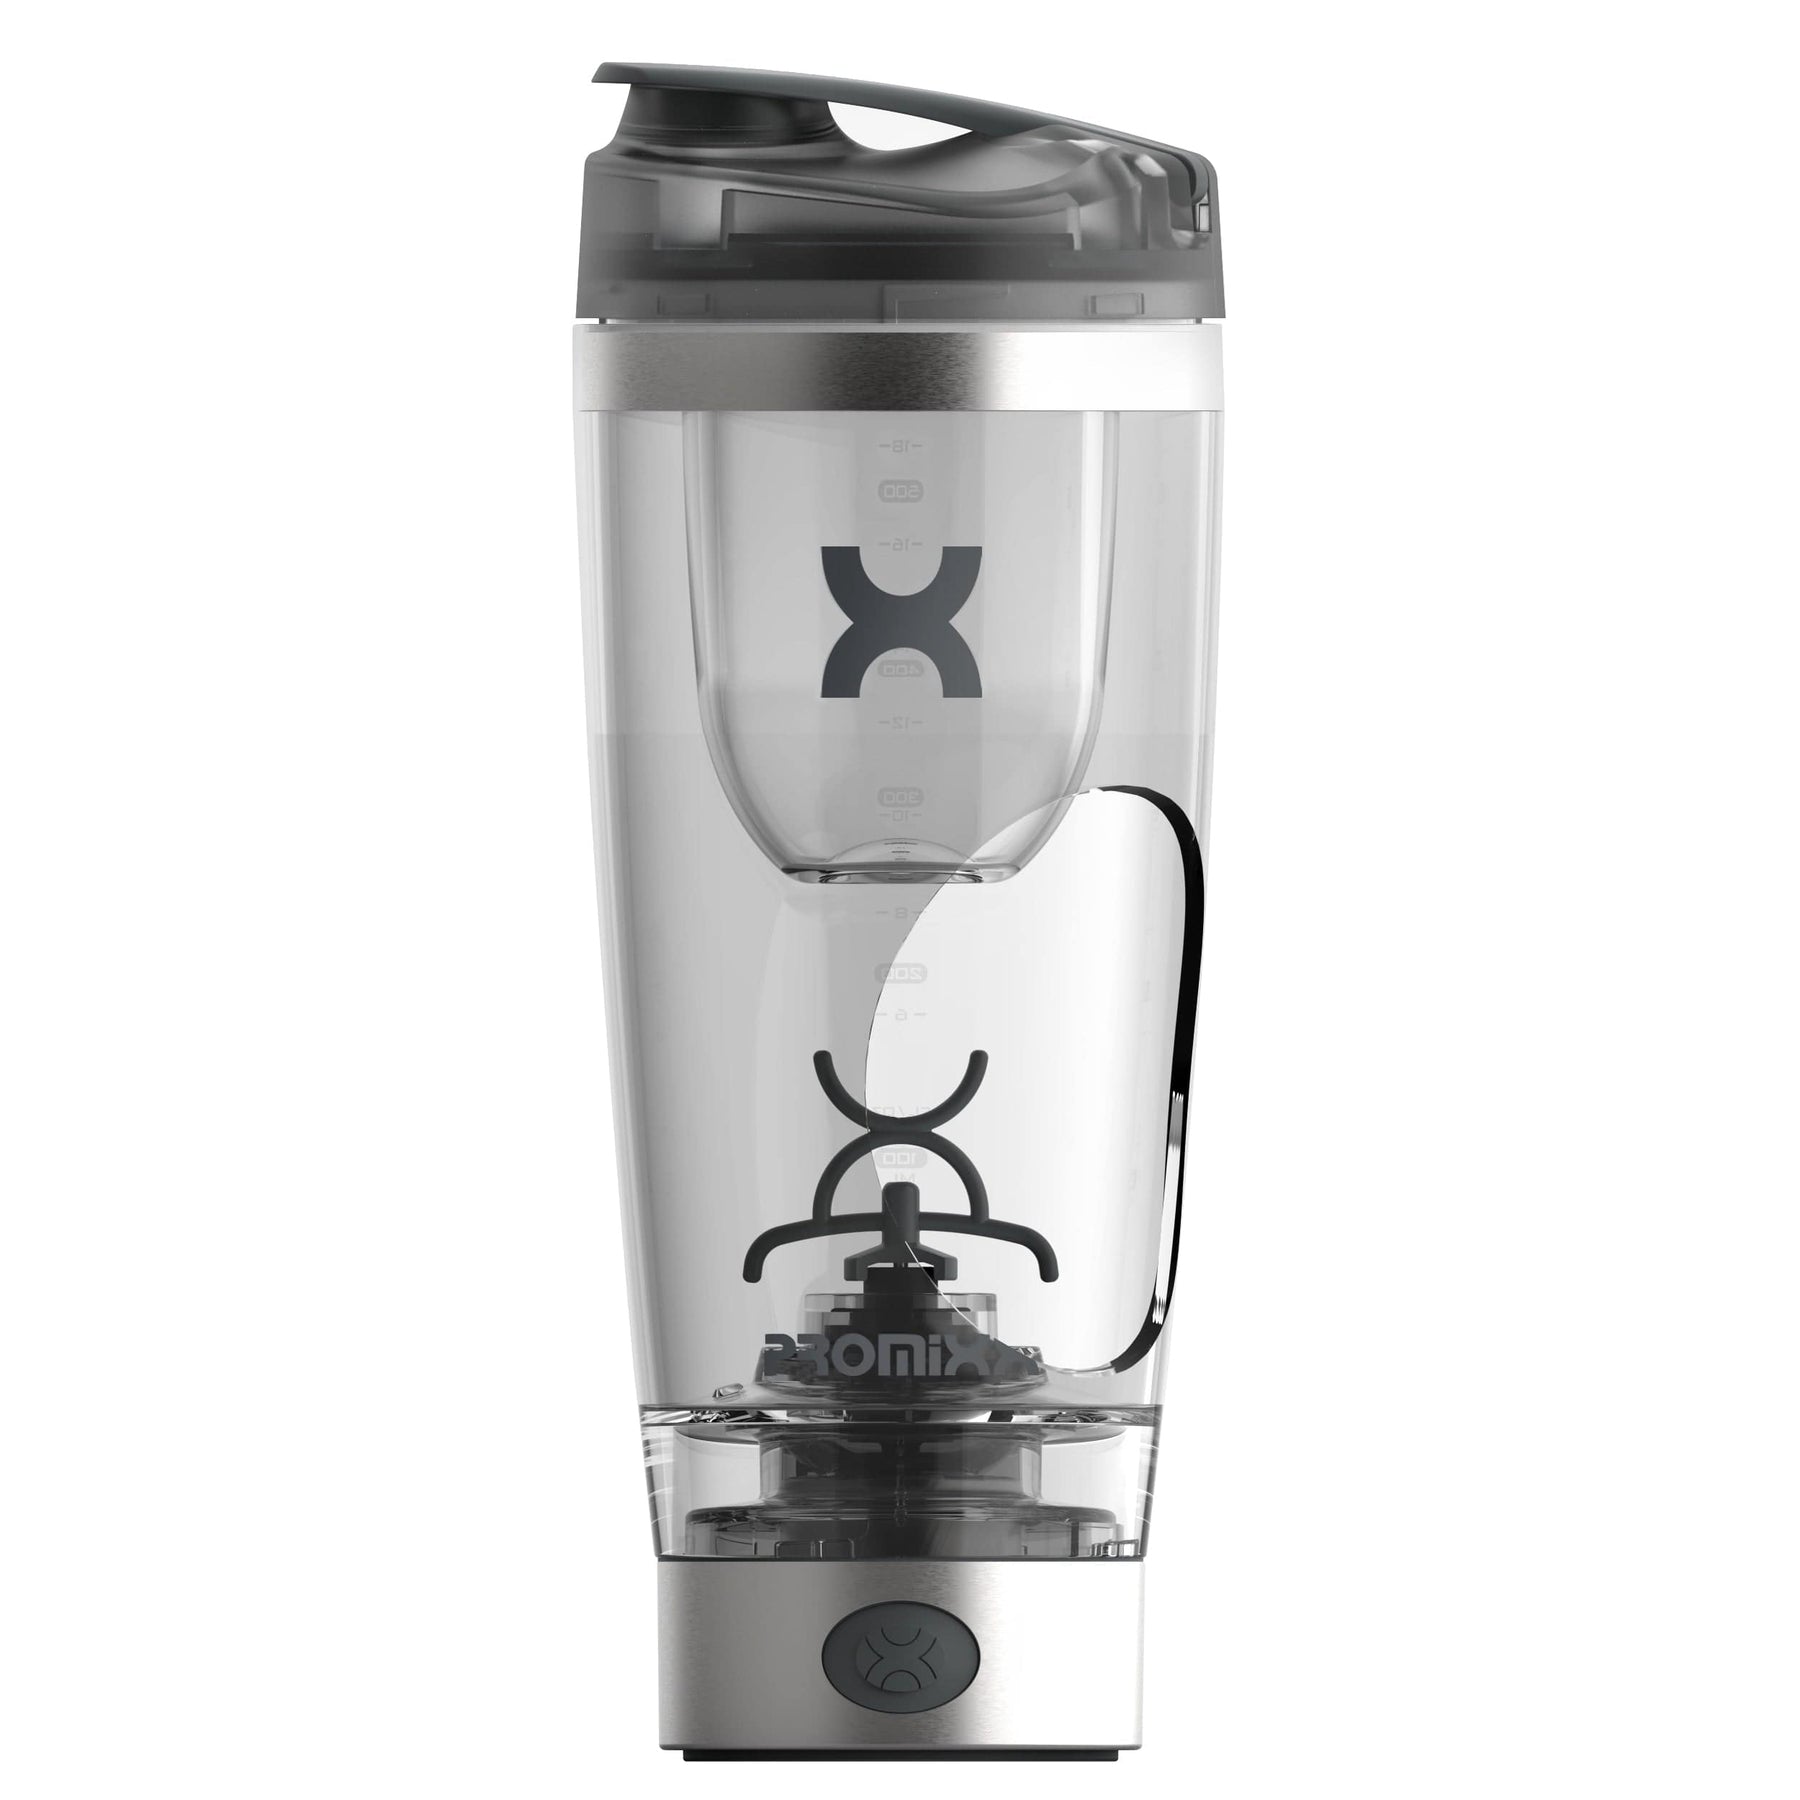 Stainless Steel 600ML PRO SHAKER GYM BOTTLE, Use For Storage: Water